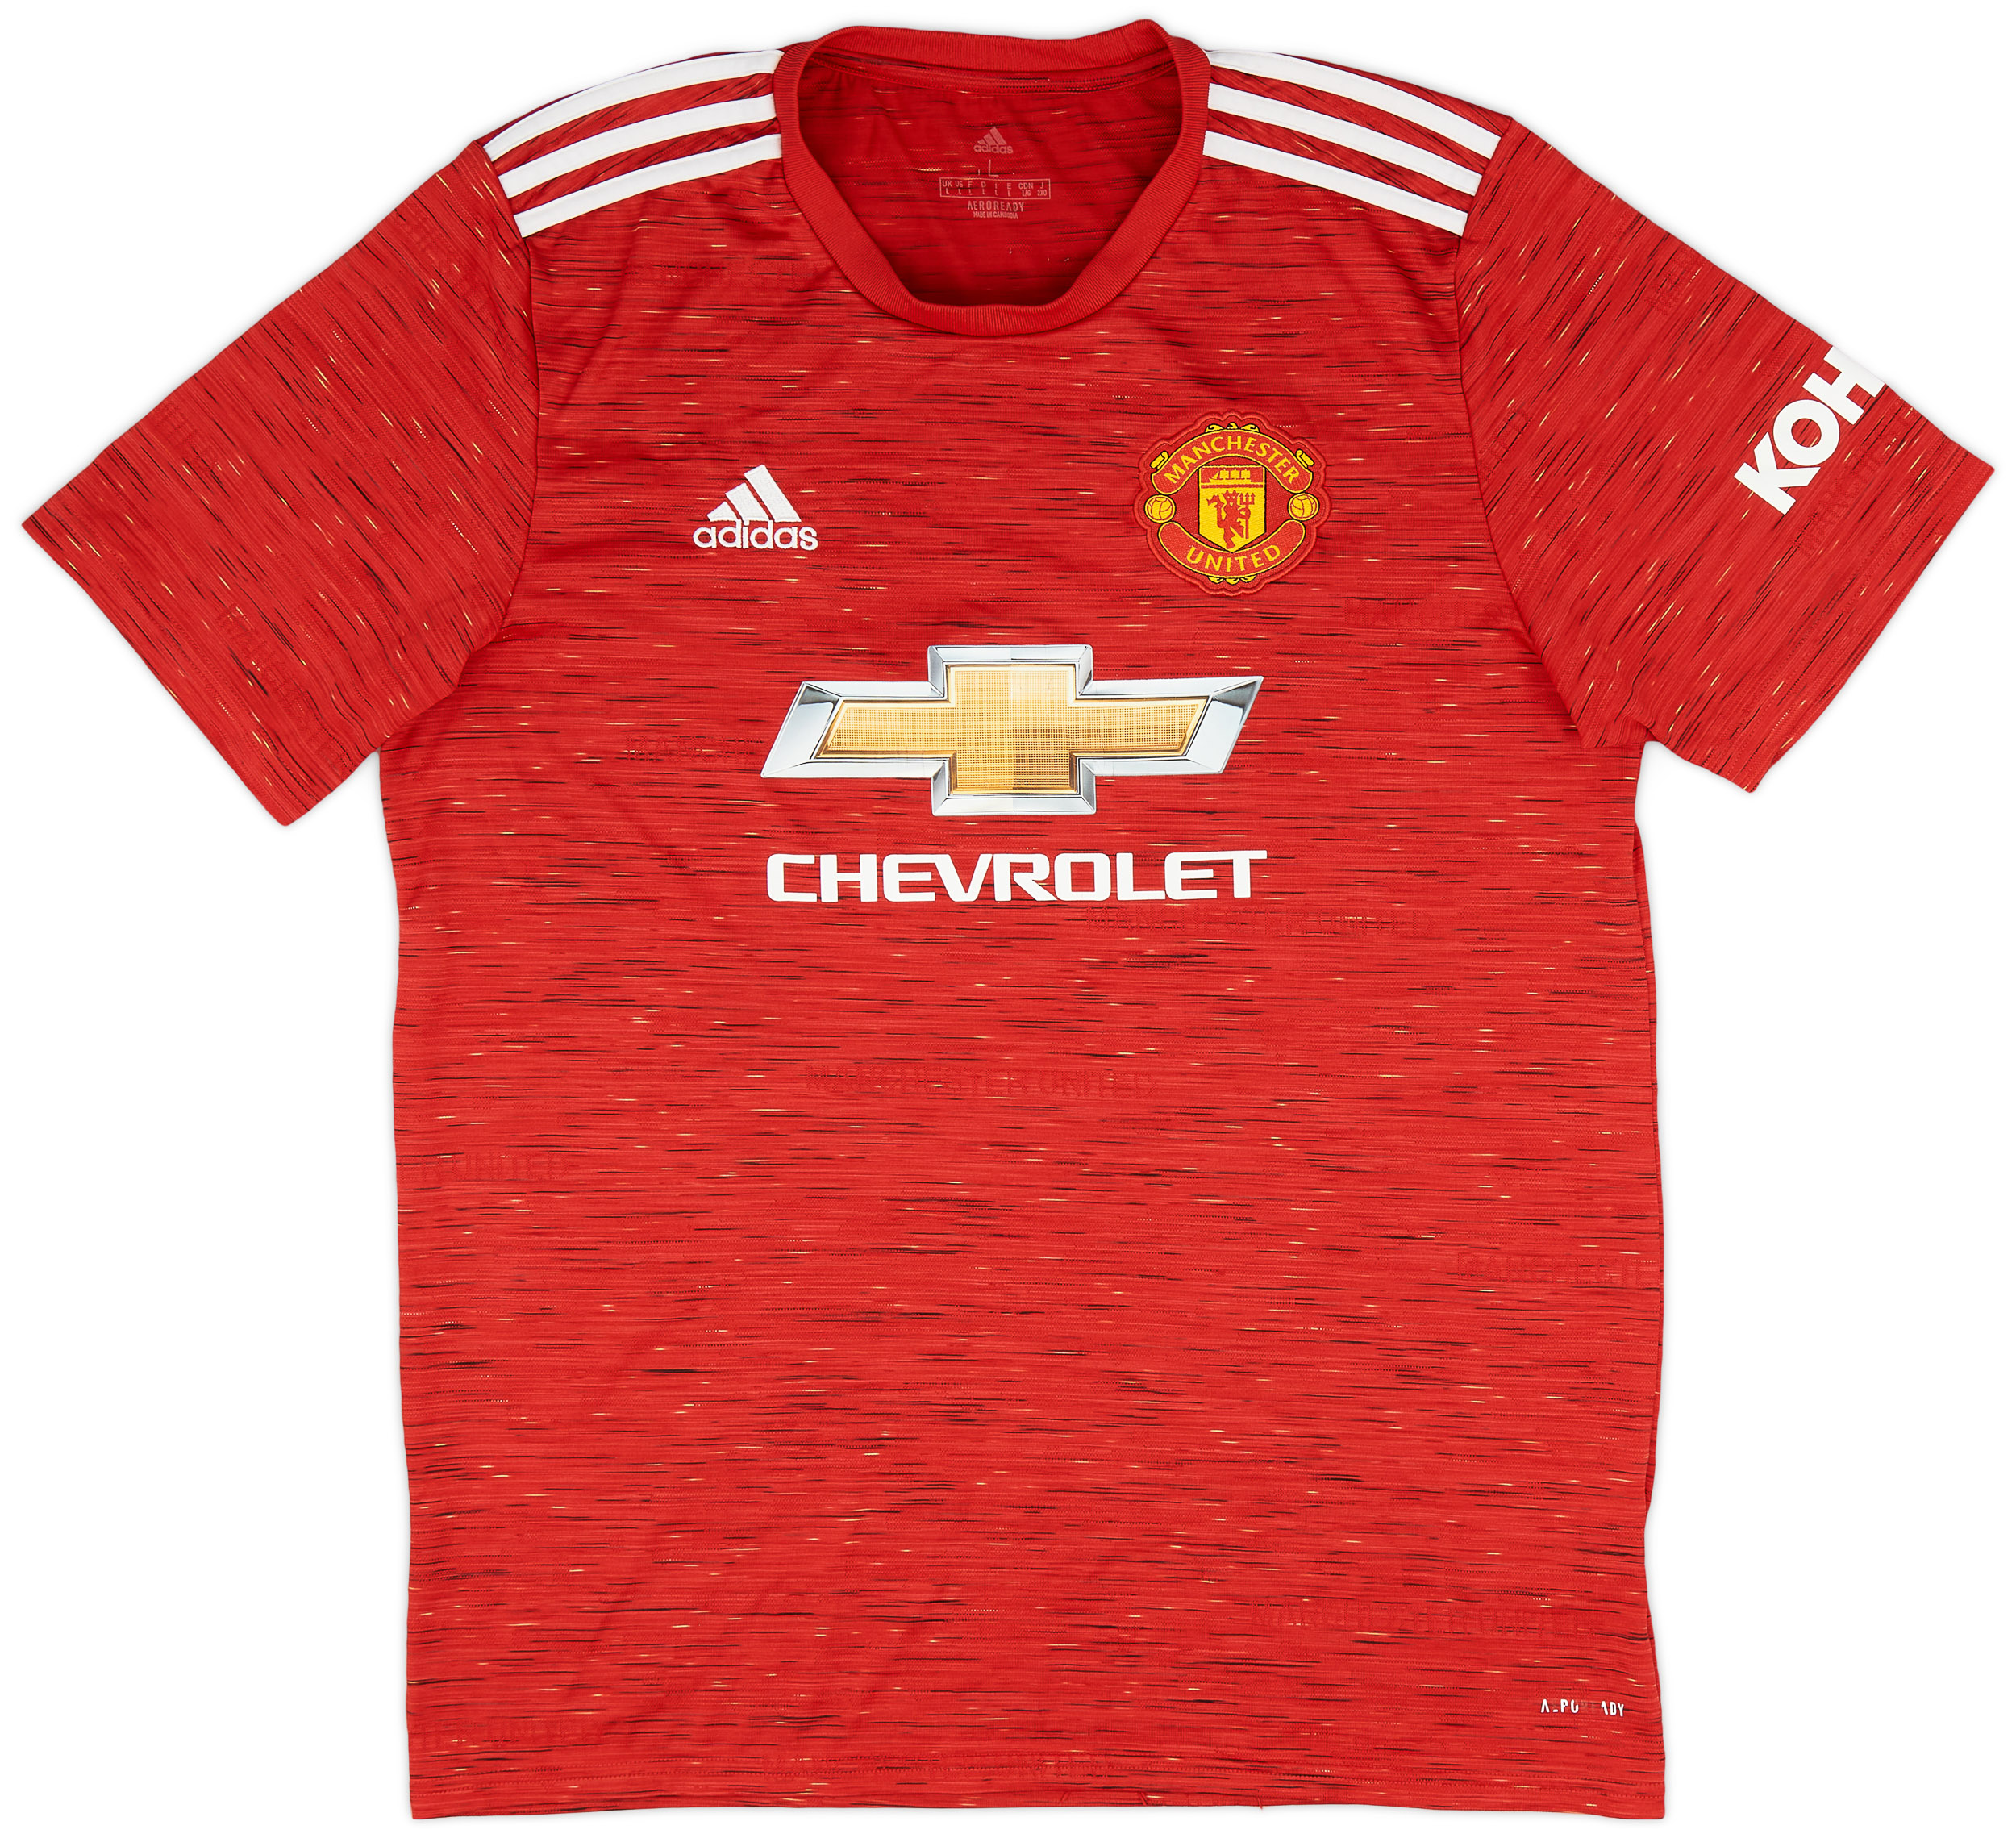 2020-21 Manchester United Home Shirt - 6/10 - ()